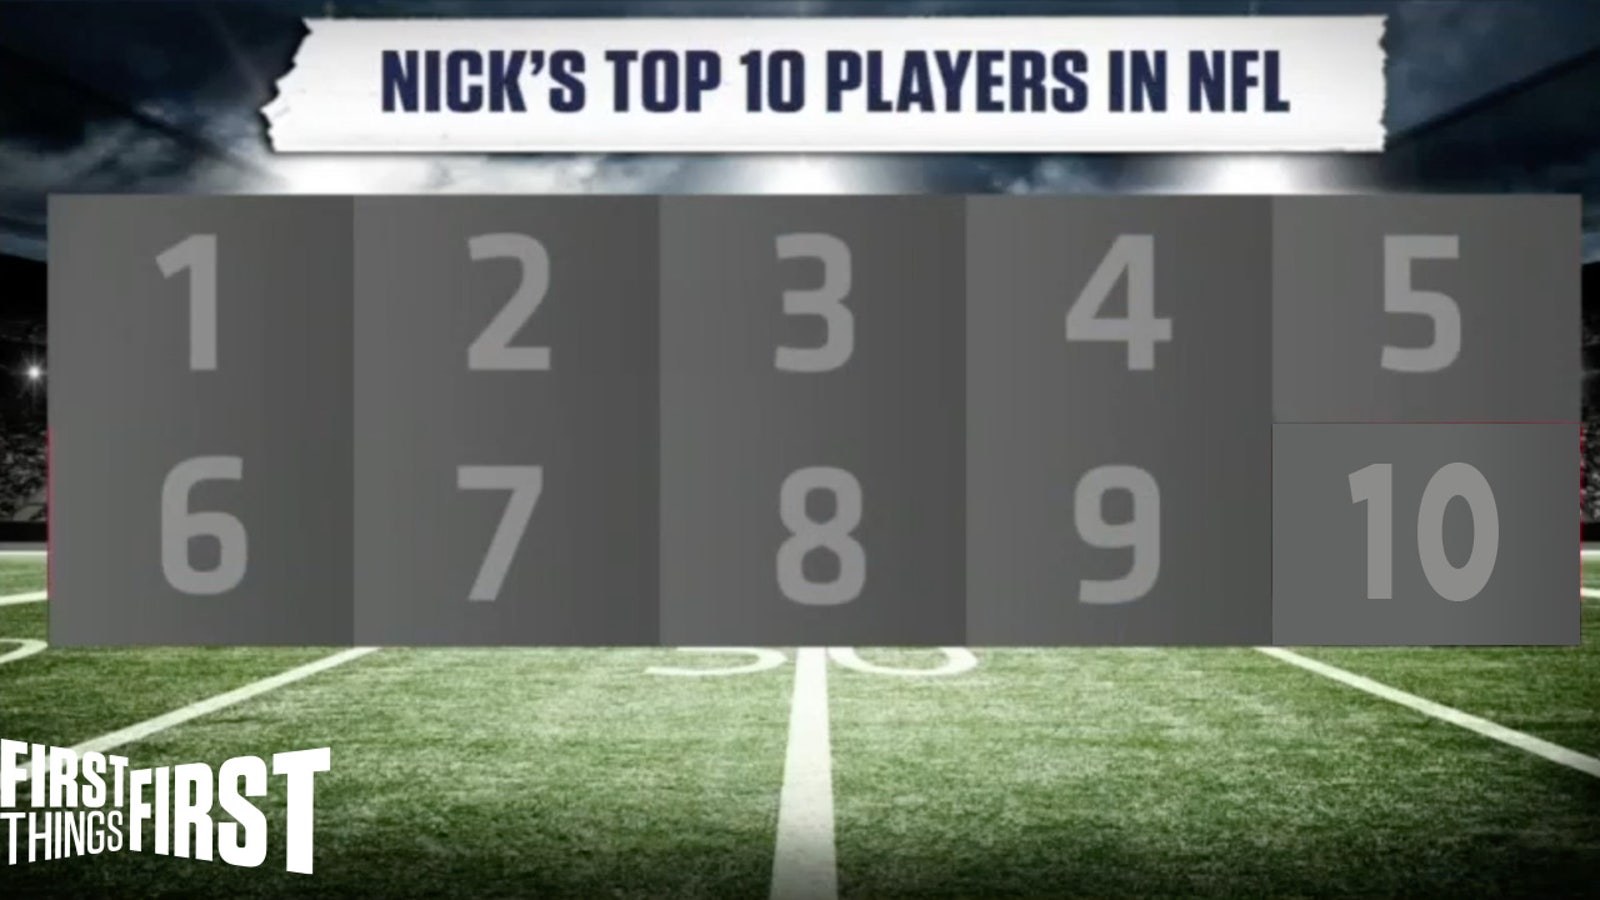 Nick Wright reveals his top 10 NFL players in the league right now I FIRST THINGS FIRST